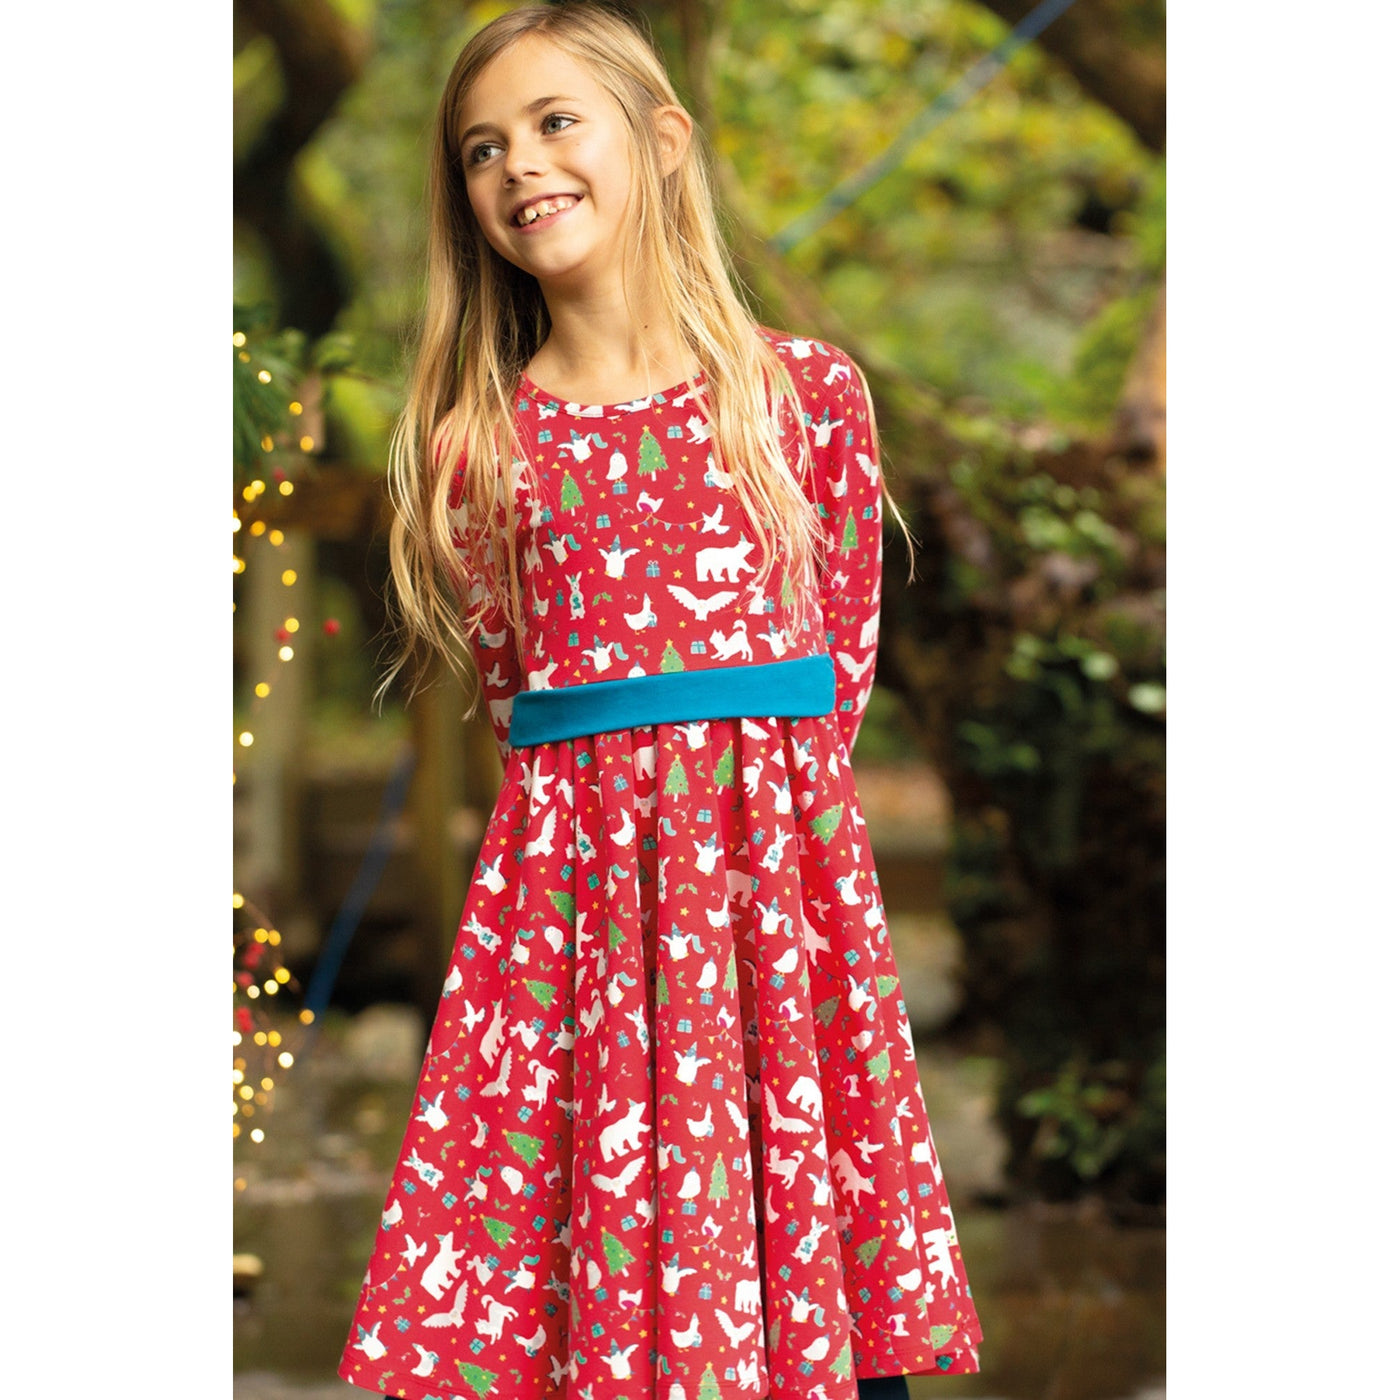 Party Skater Dress - Lets Party by Frugi